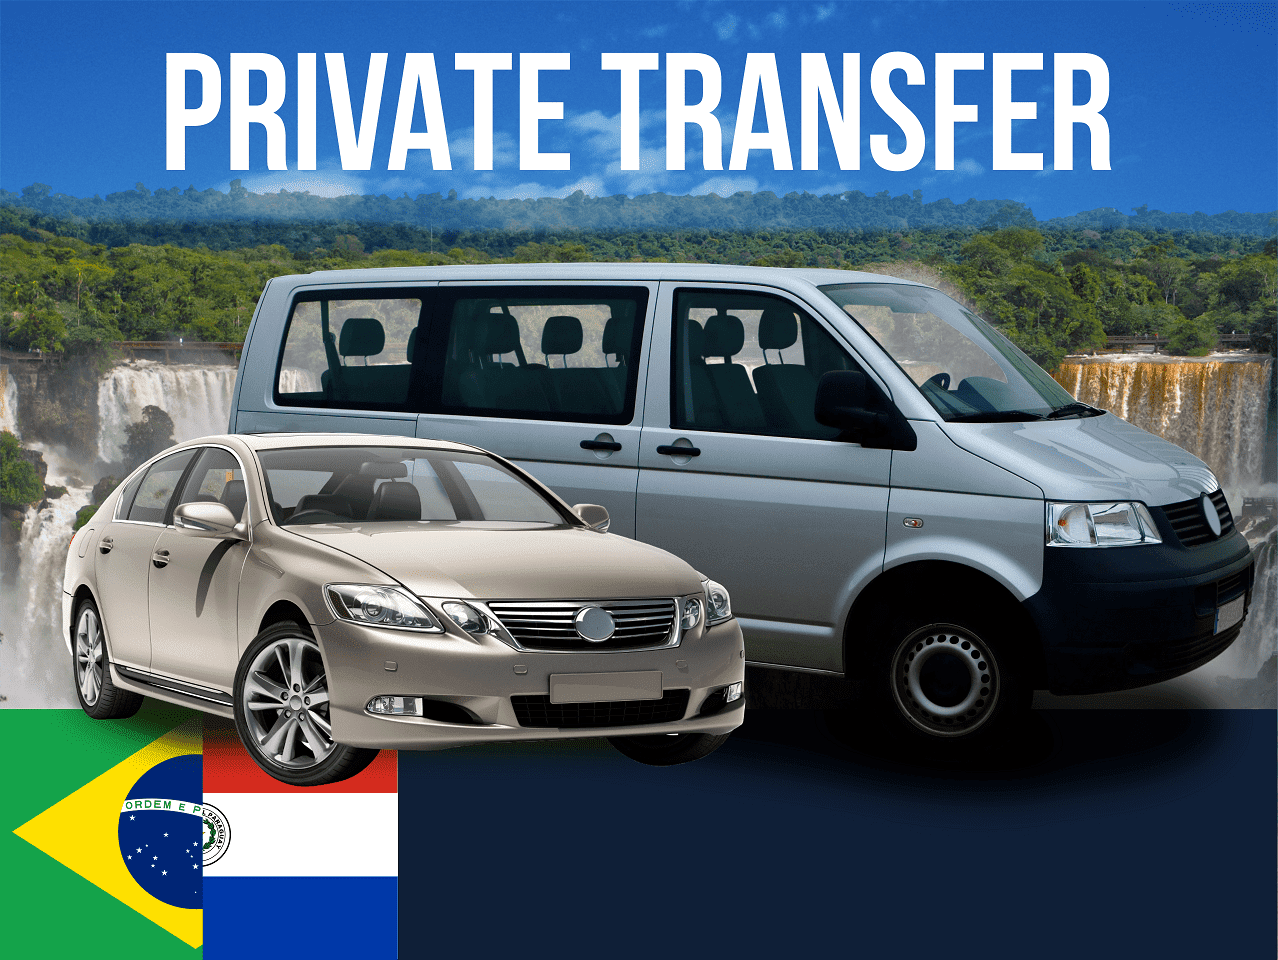 Private transfer from Brazil to Paraguay